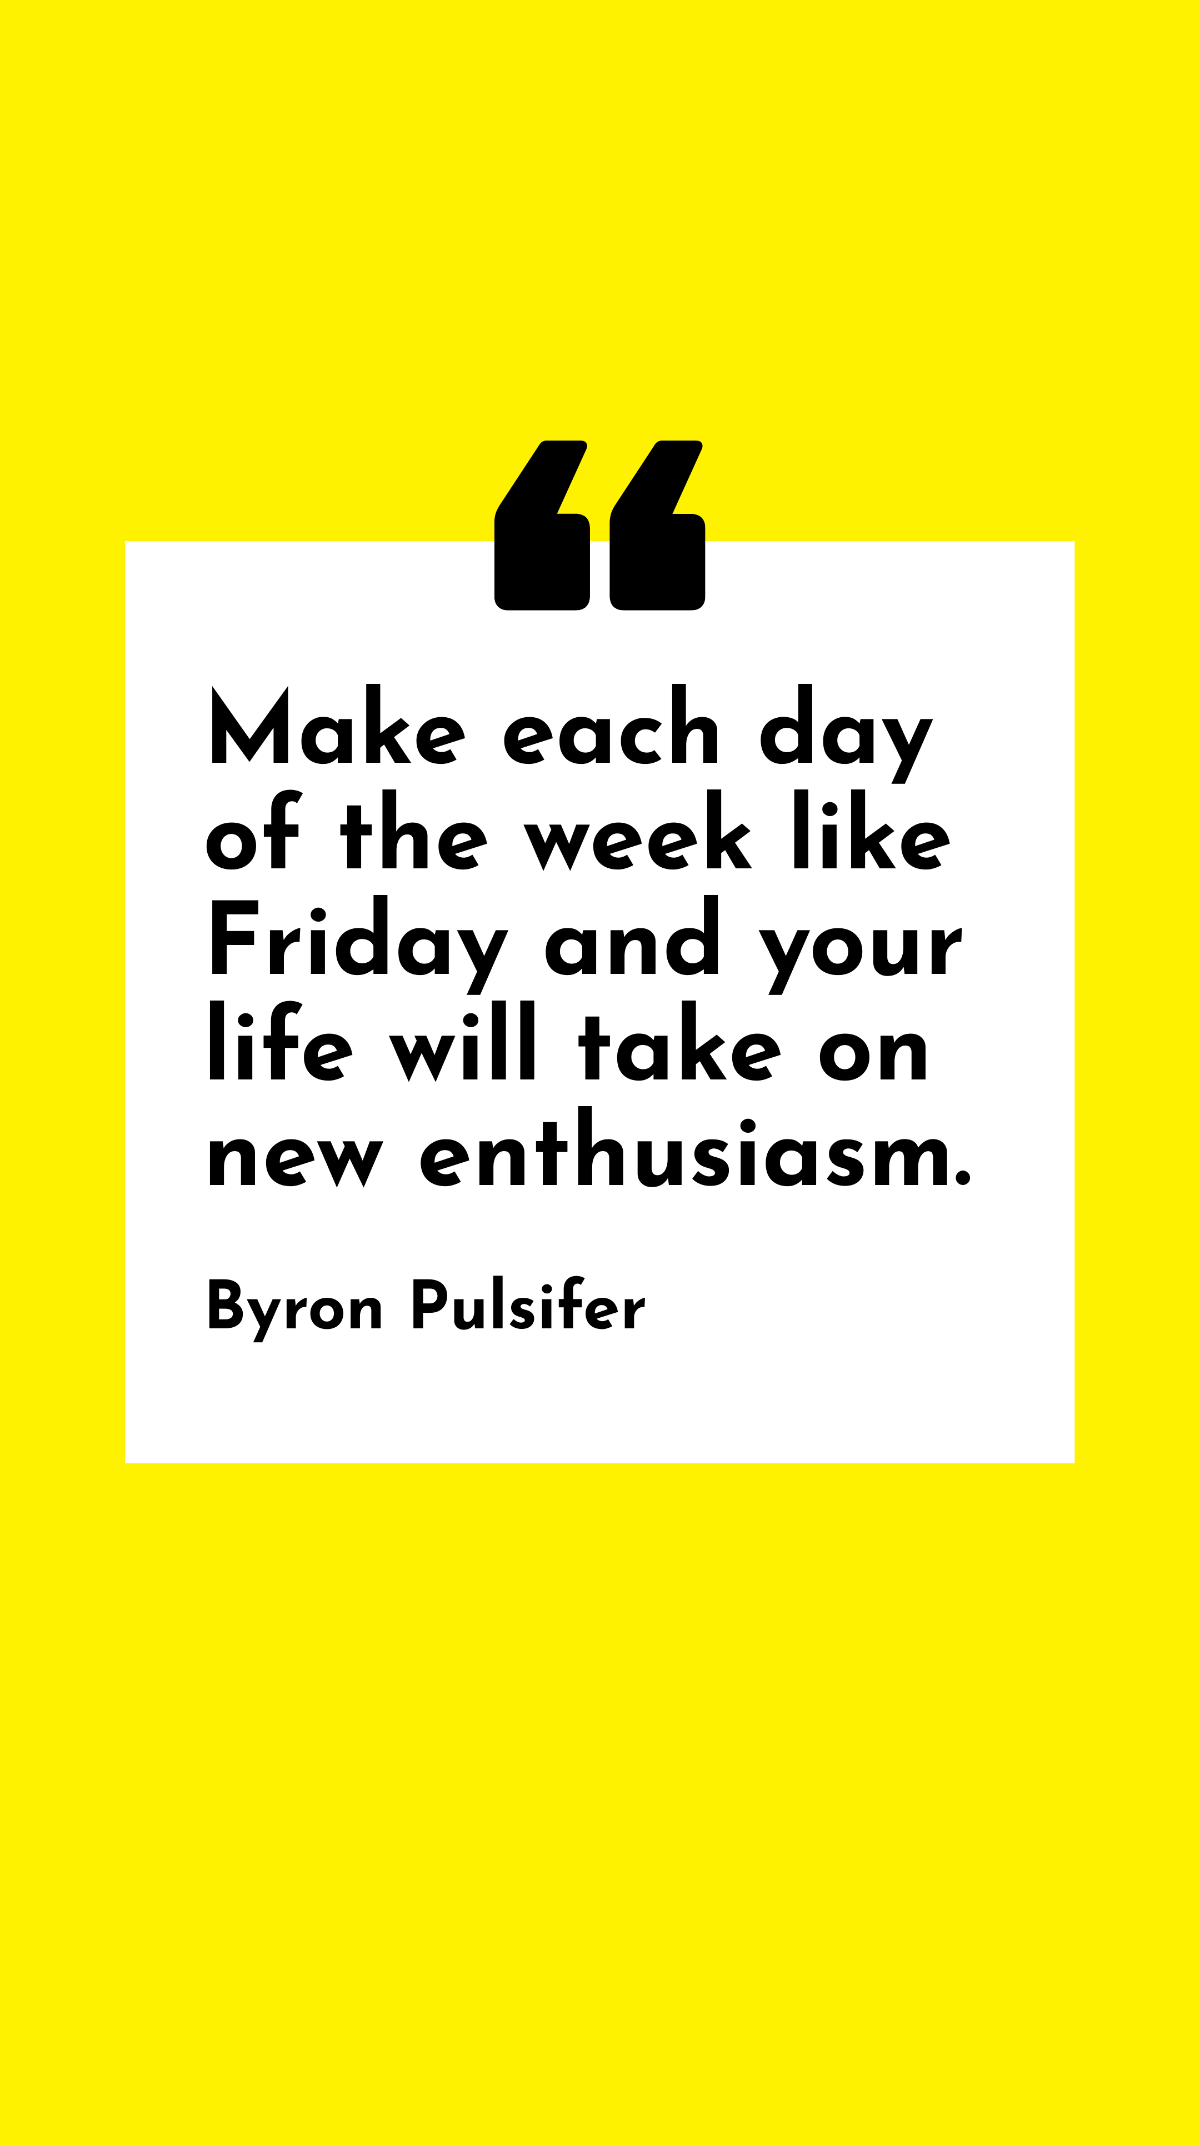 Byron Pulsifer - Make each day of the week like Friday and your life will take on new enthusiasm.